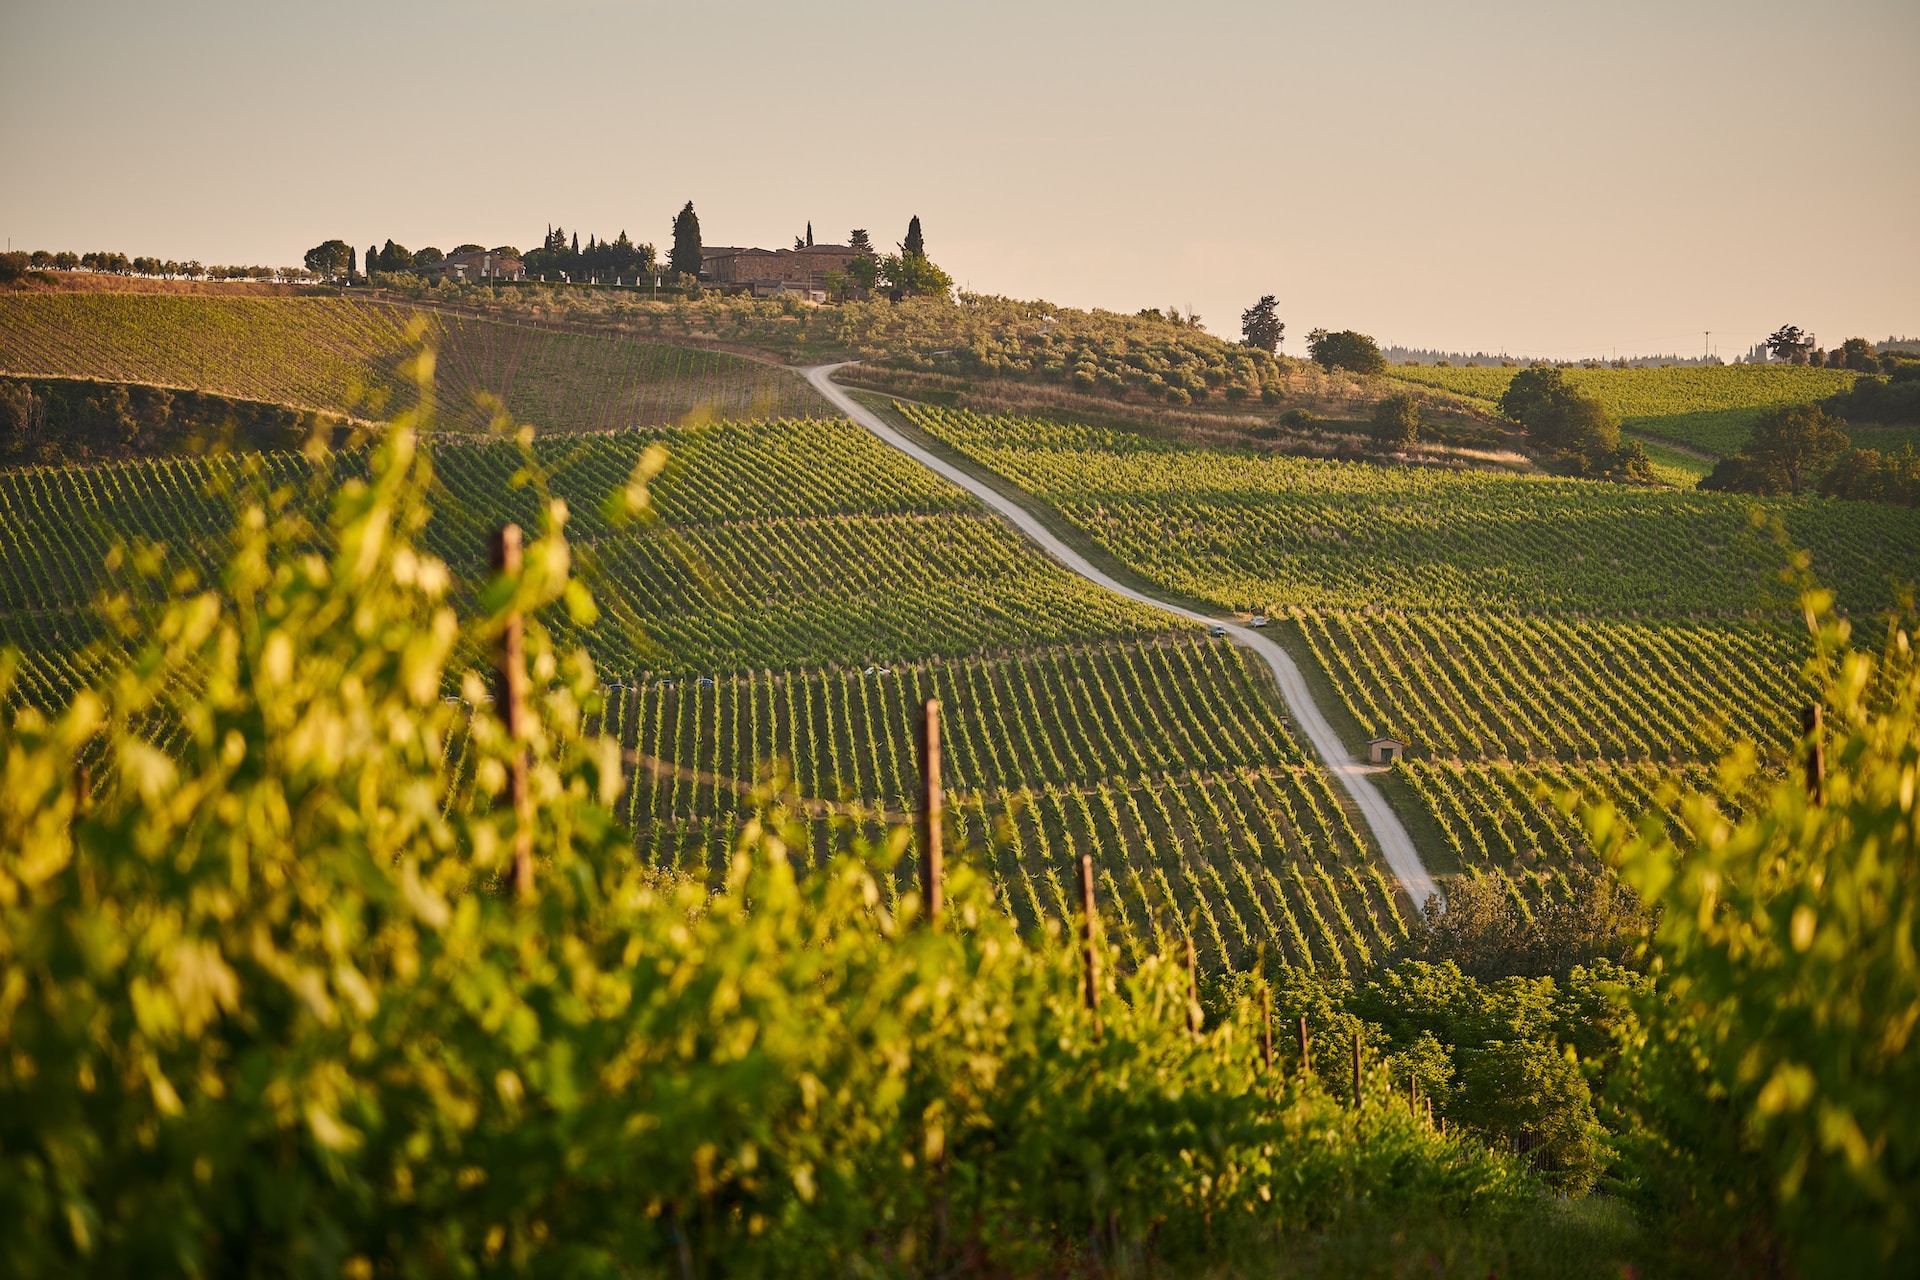 discover italy's wine at the rolling hills covered in vineyards